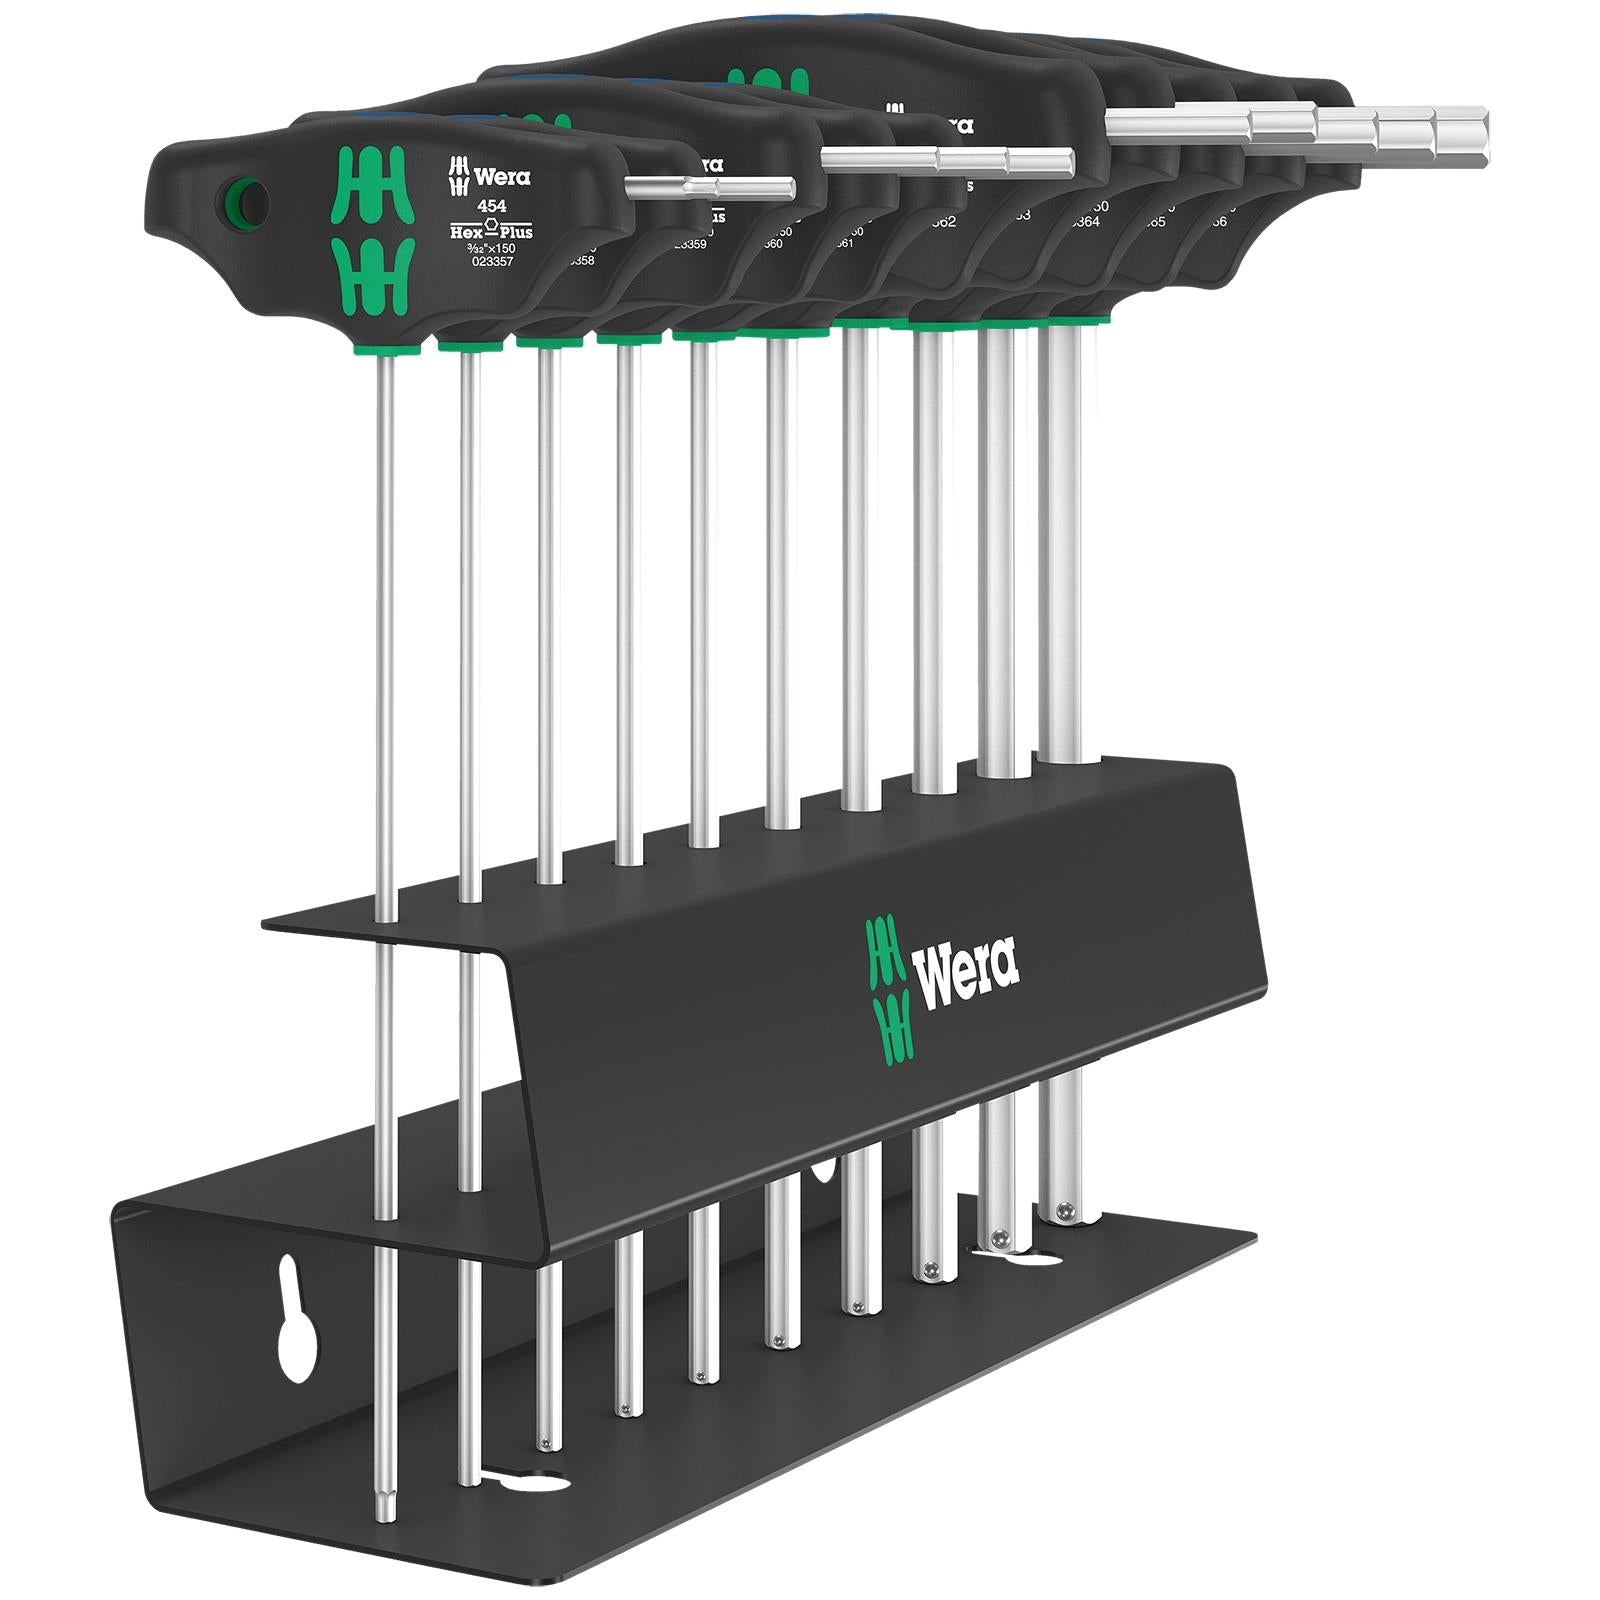 Wera Screwdriver Set T-Handle Hex Plus with Holding Function Metal Rack 10 Piece 454/10 HF Set Imperial 2